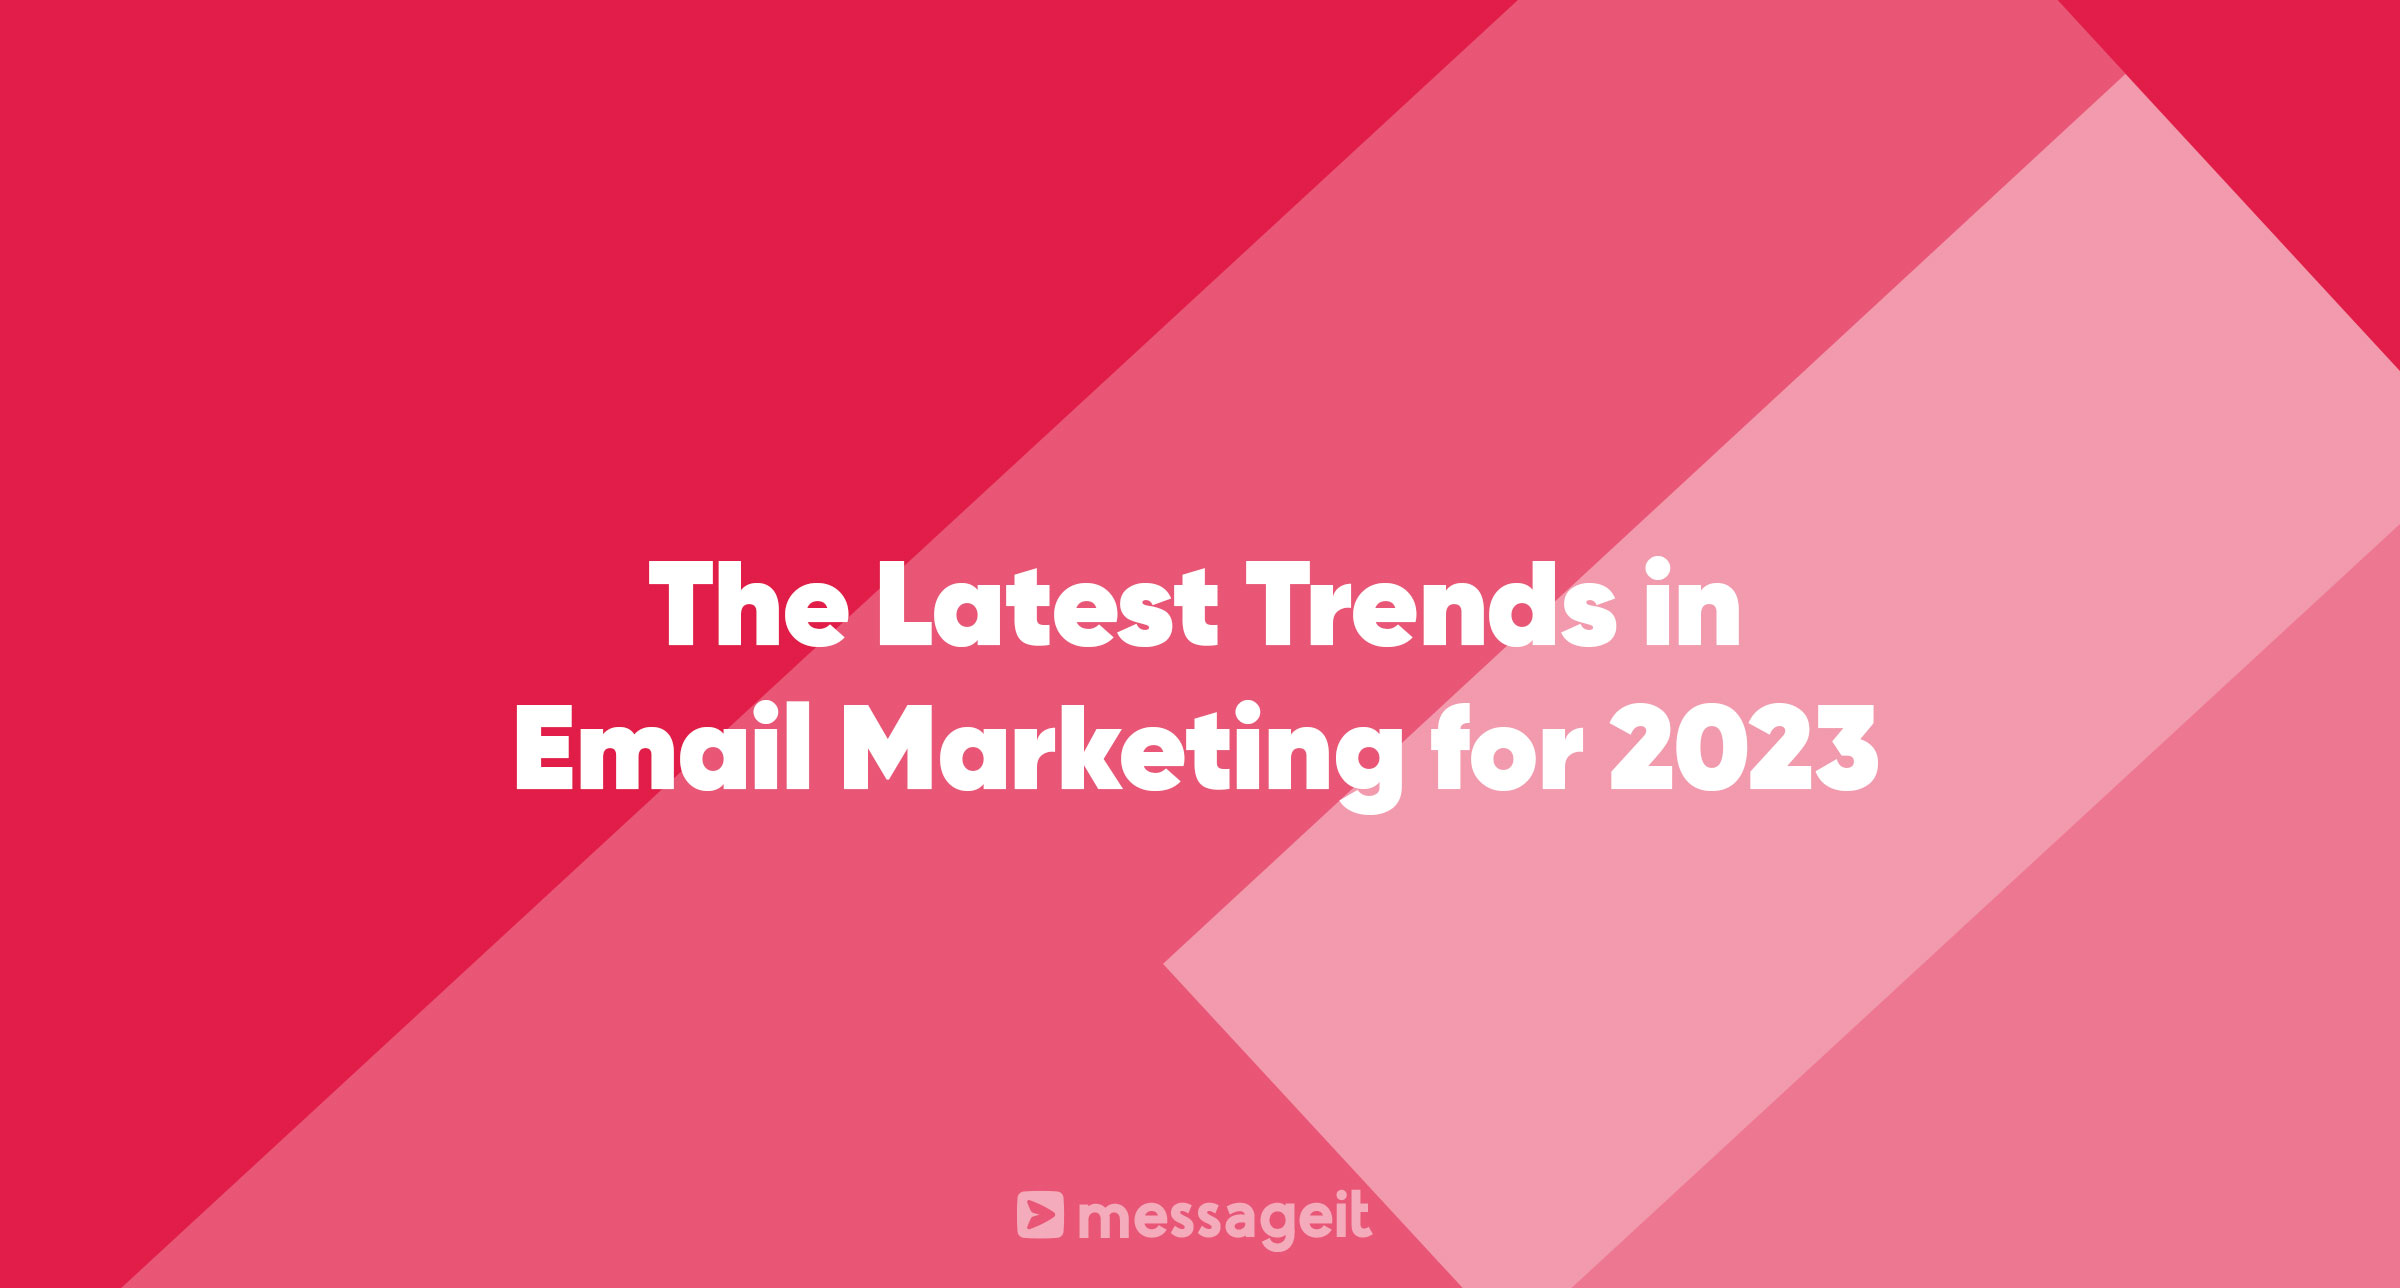 Article | The Latest Trends in Email Marketing for 2023